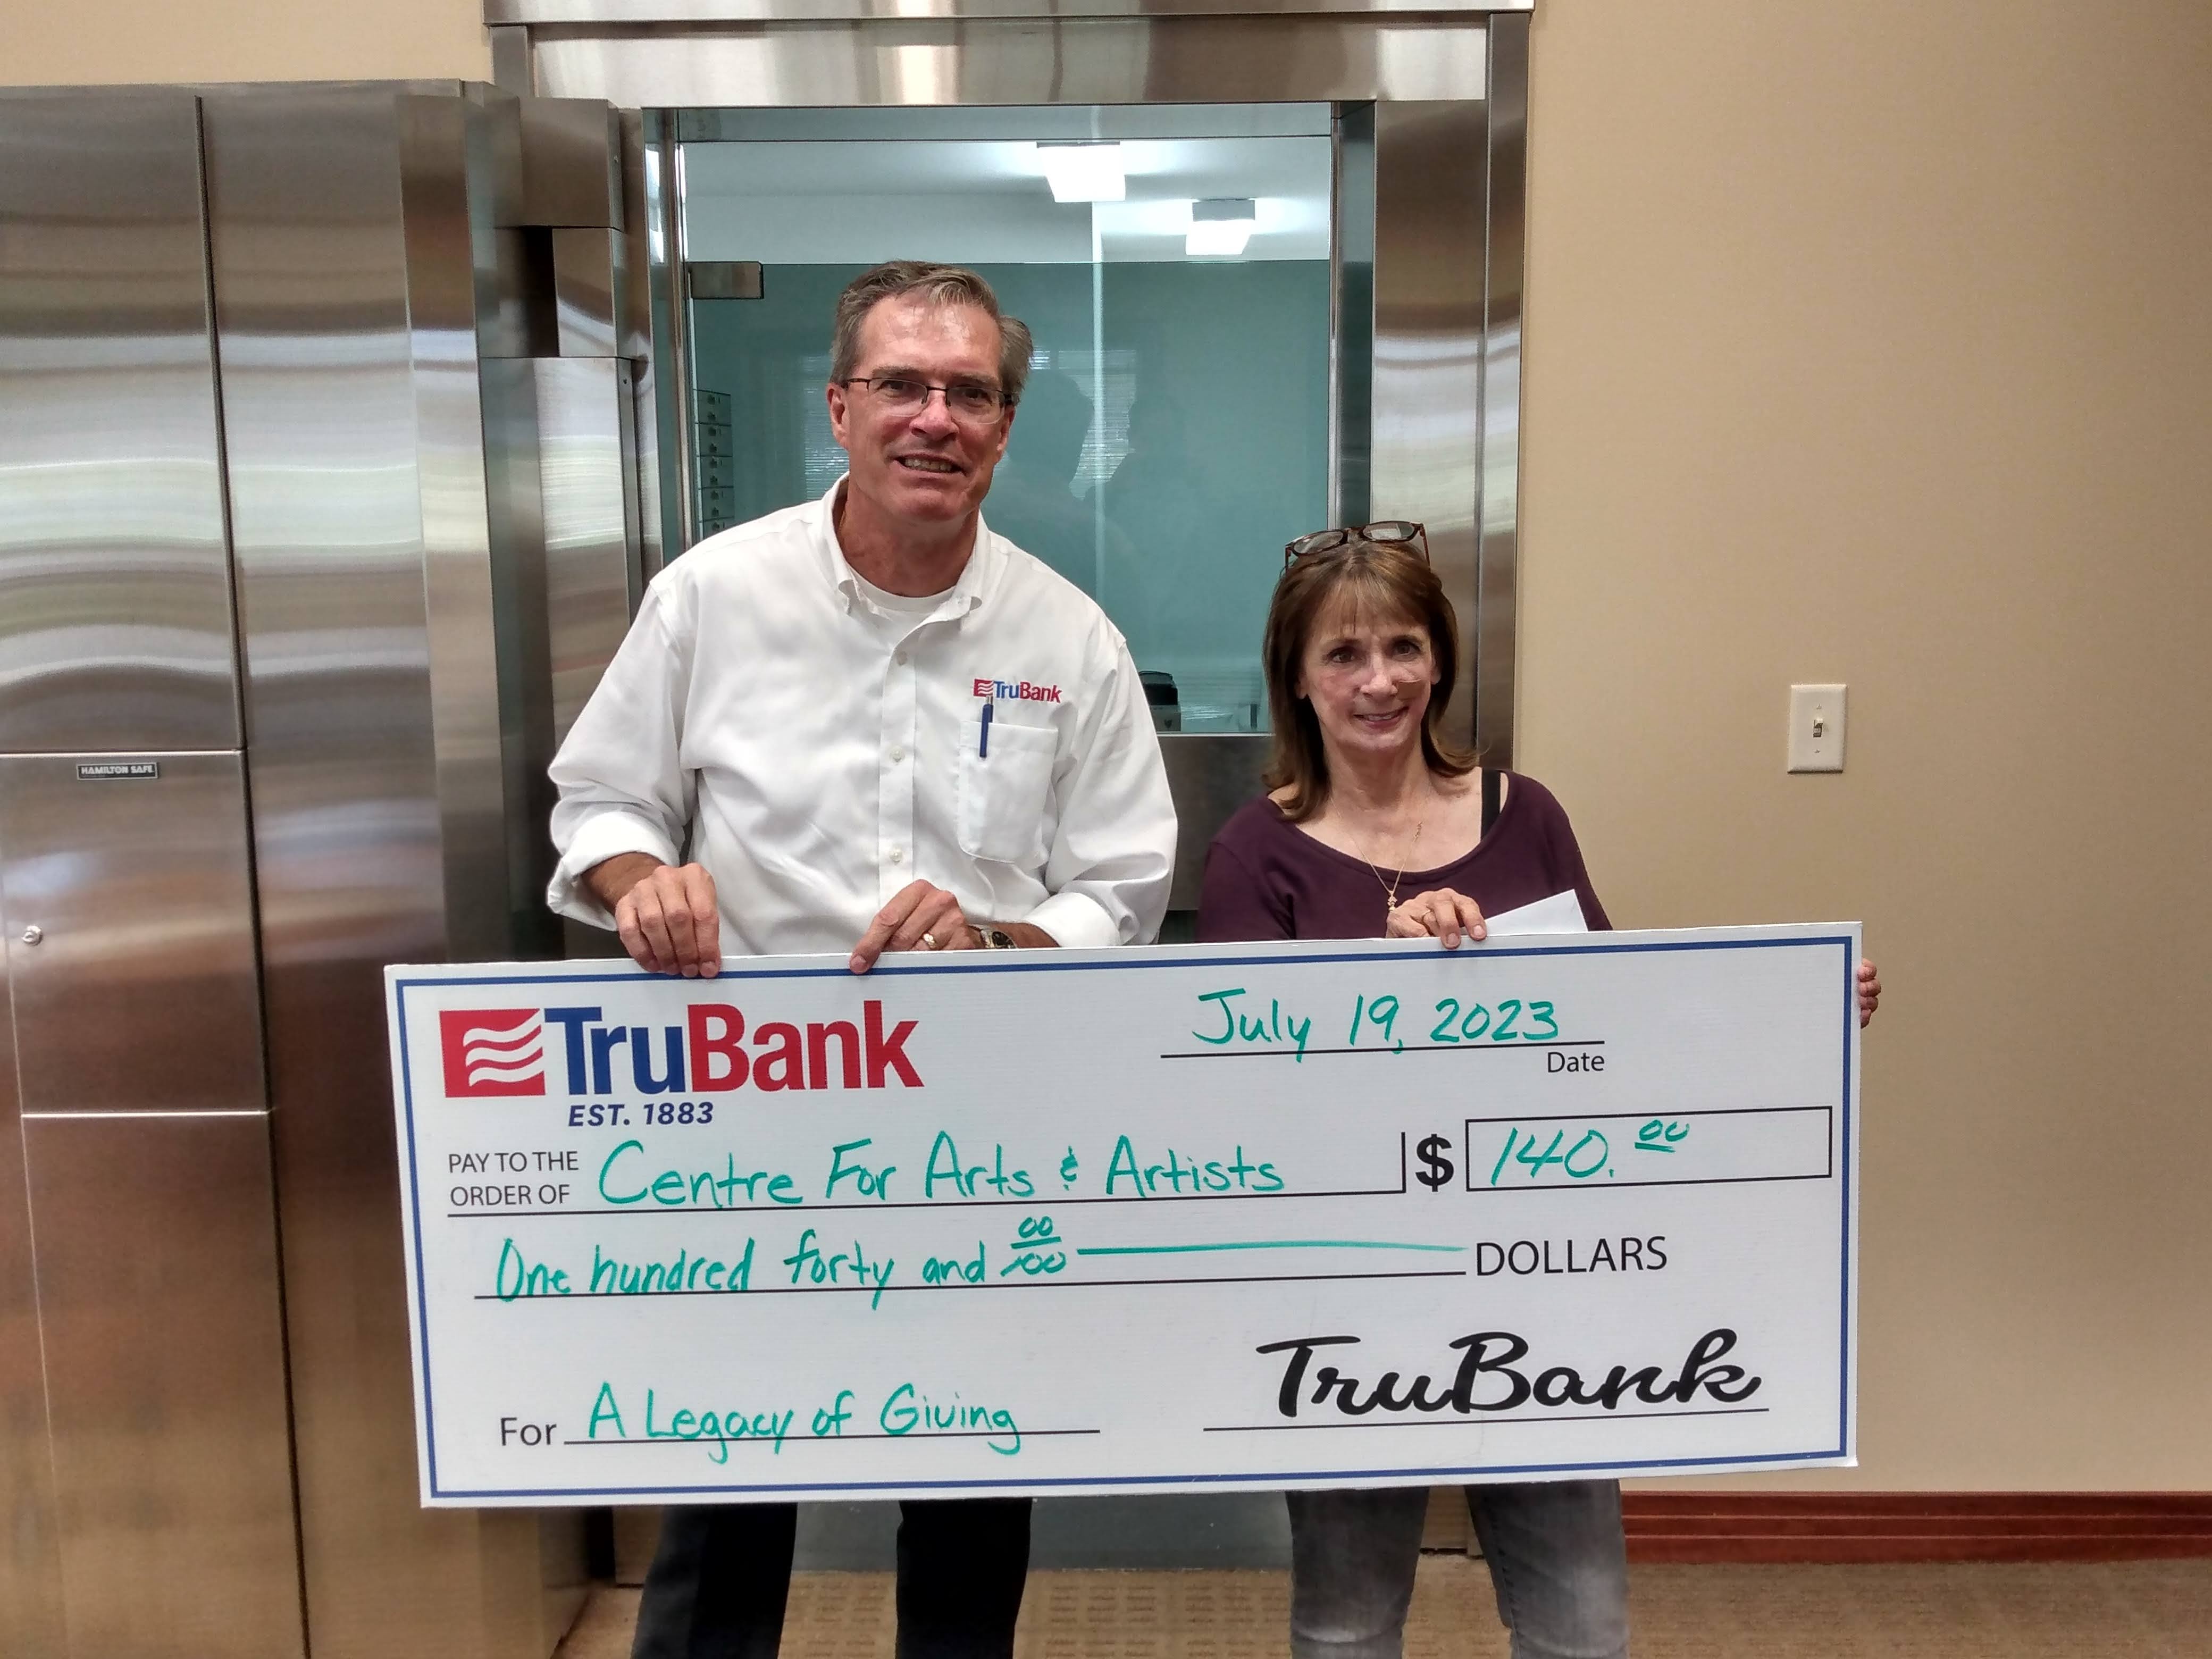 TruBank donates to the Centre for Arts & Artists